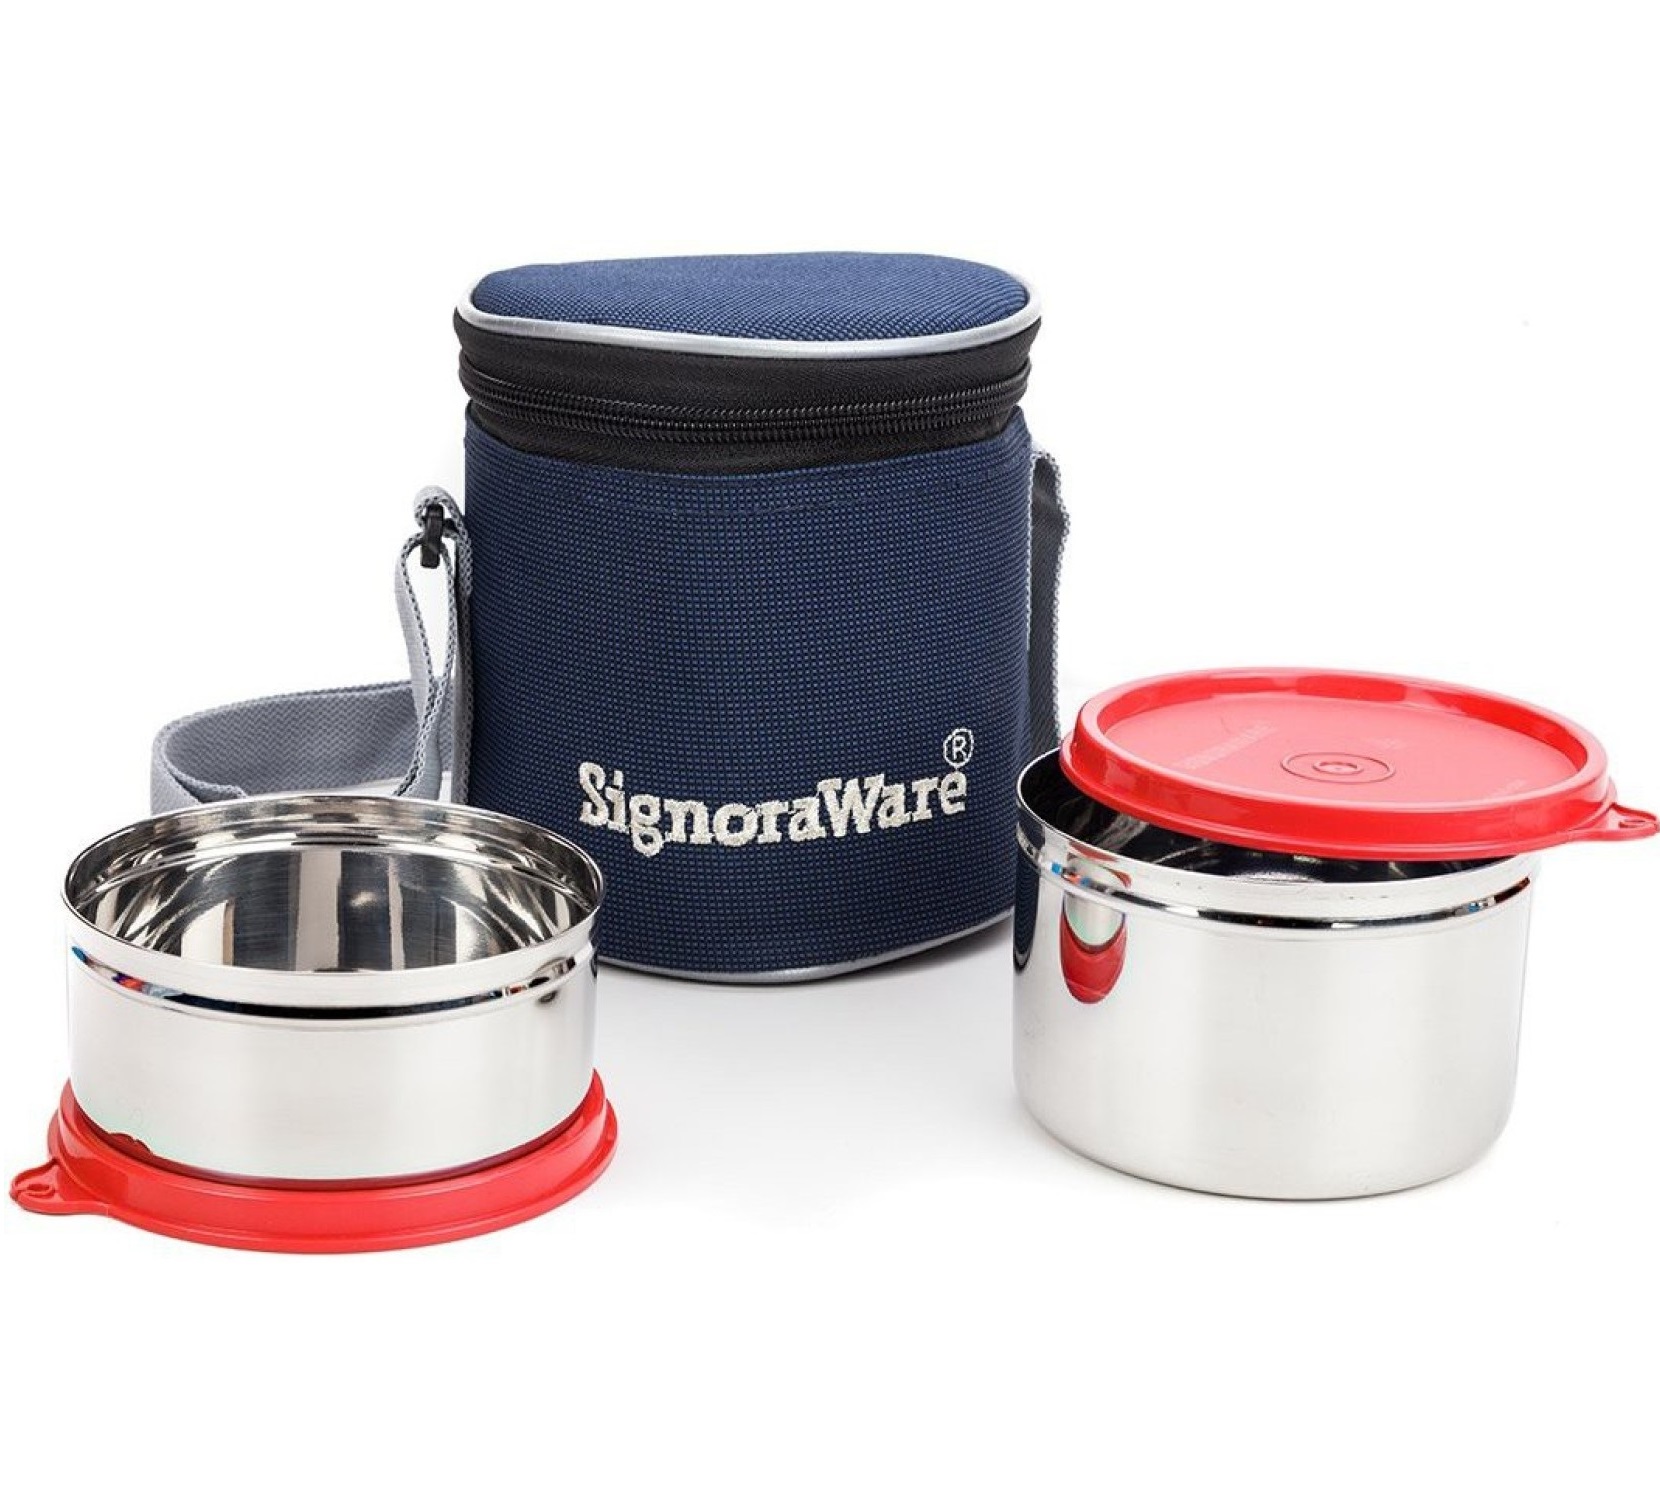 Signoraware Stainless Steel Executive Lunch box